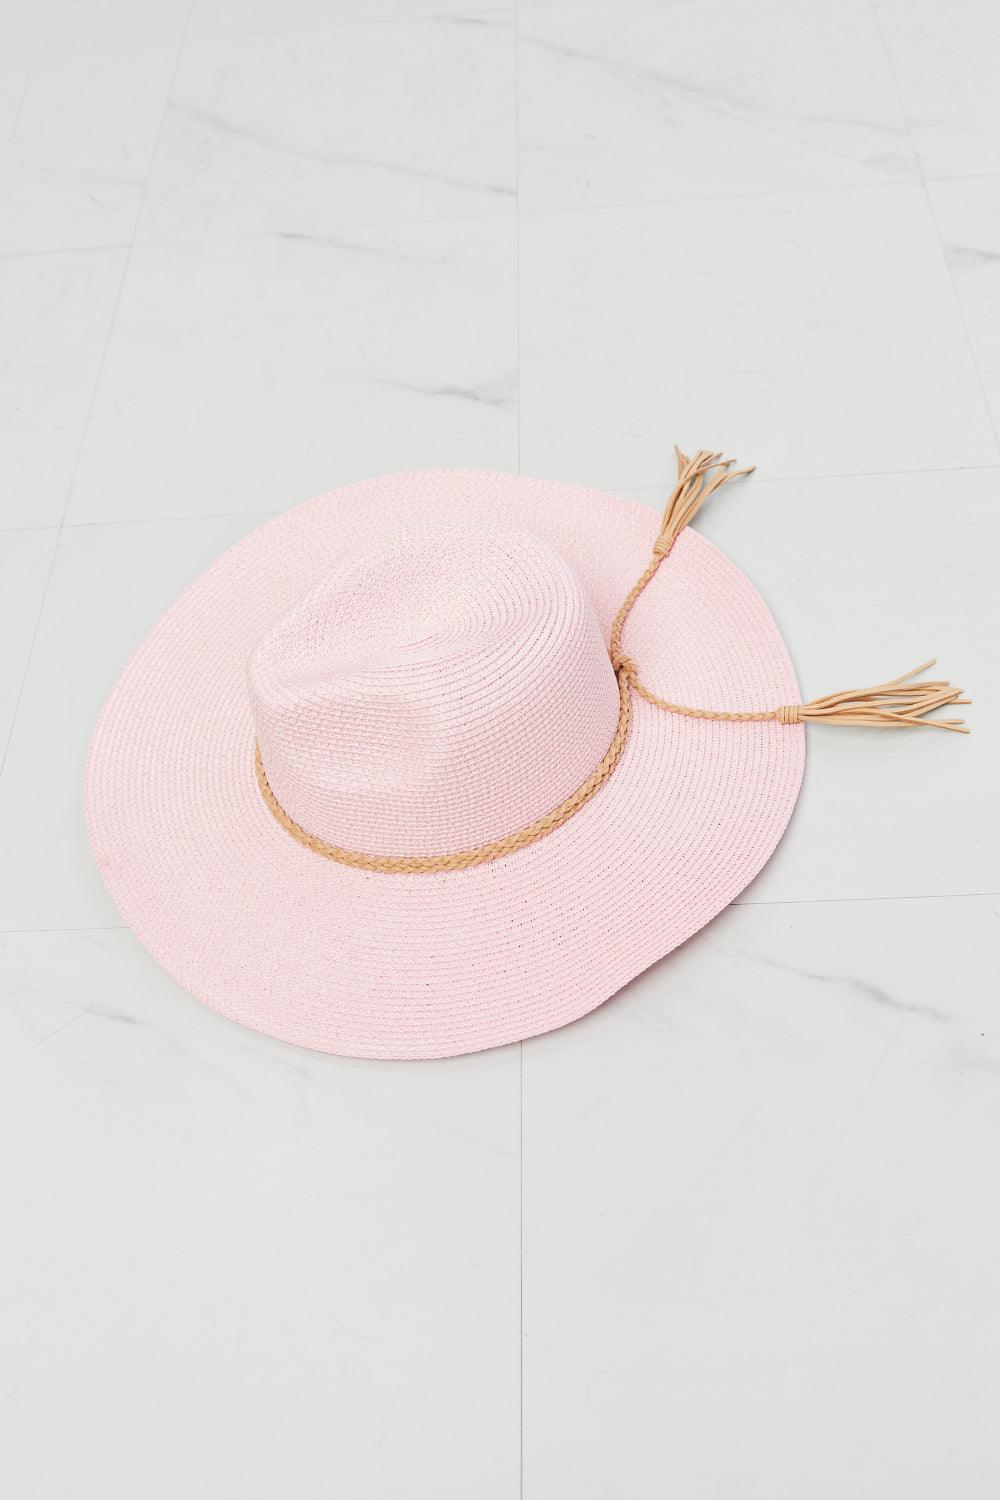 Fame Route To Paradise Straw Hat - Lab Fashion, Home & Health